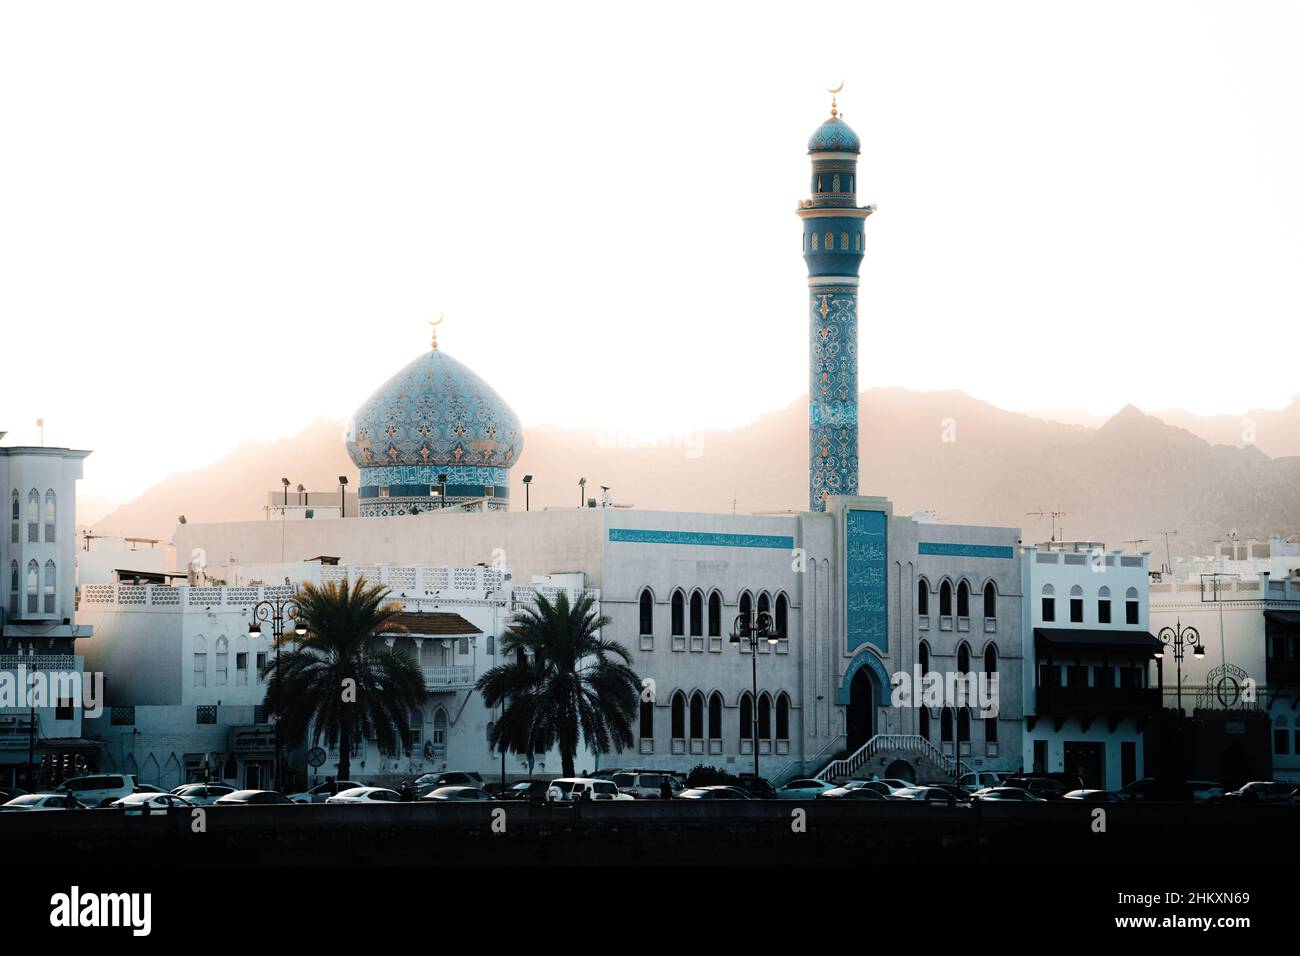 A mosque in Oman Muscat surrounded by mountains Stock Photo